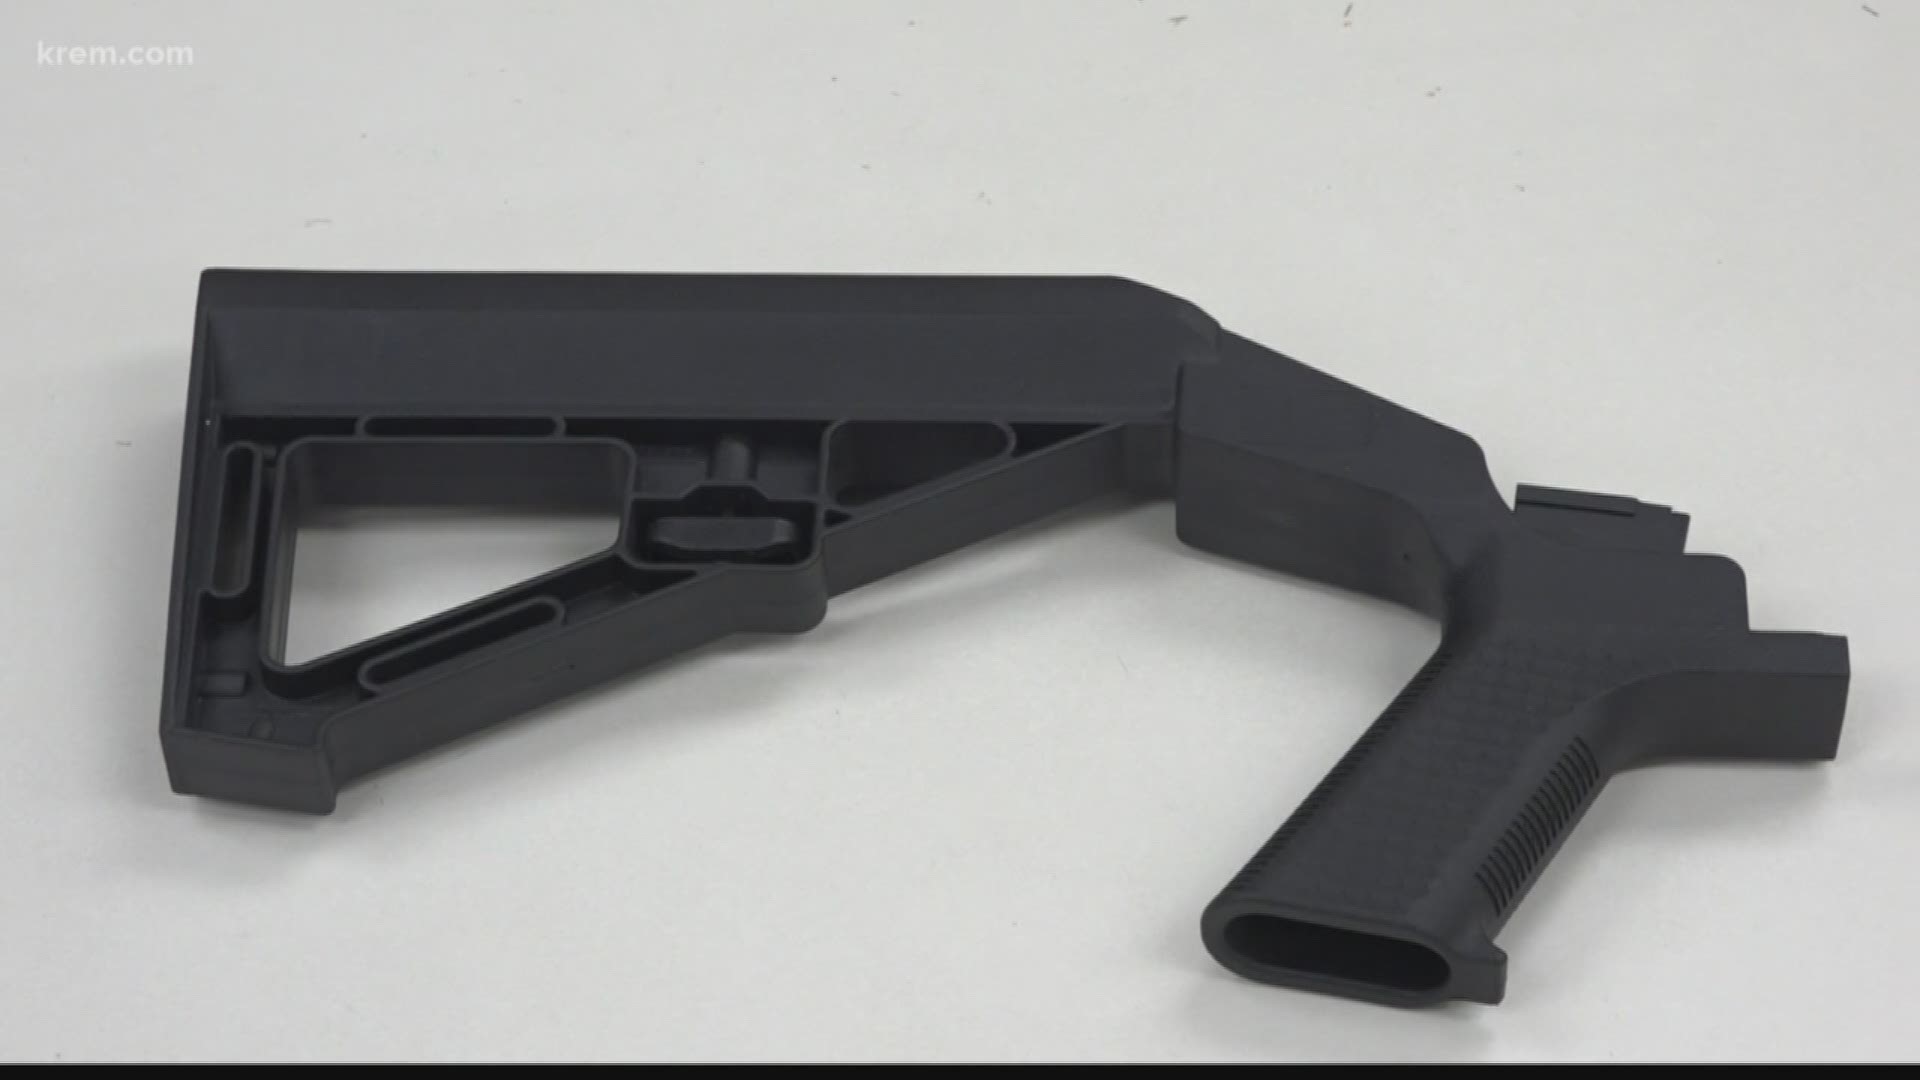 KREM Reporter Alexa Block spoke with local law enforcement about the recently imposed federal bump stock ban.